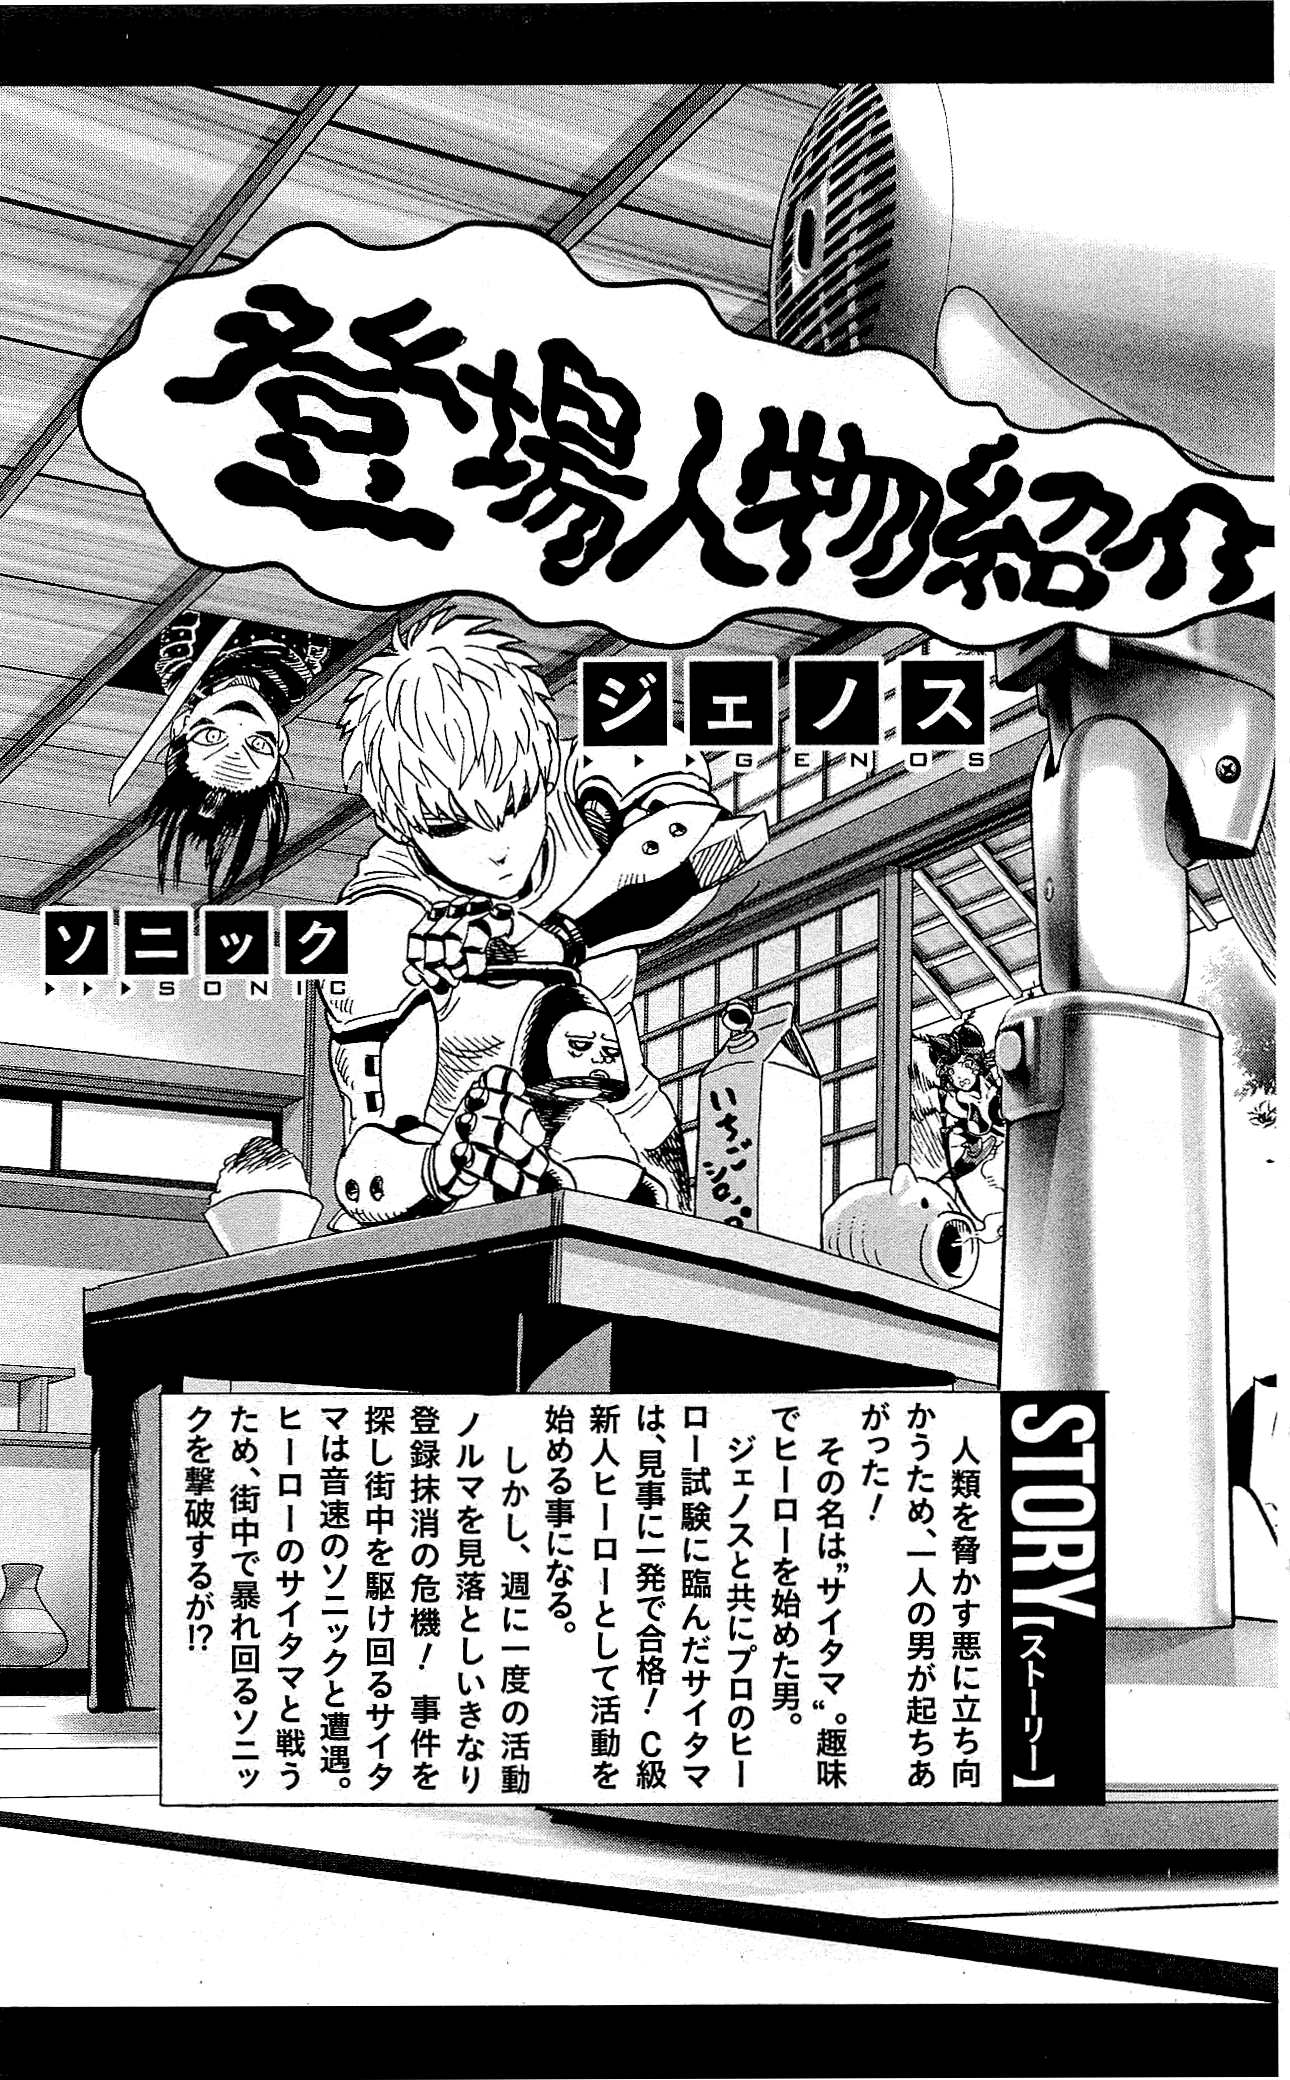 One Punch Man, Chapter 21 - Giant Meteor image 011